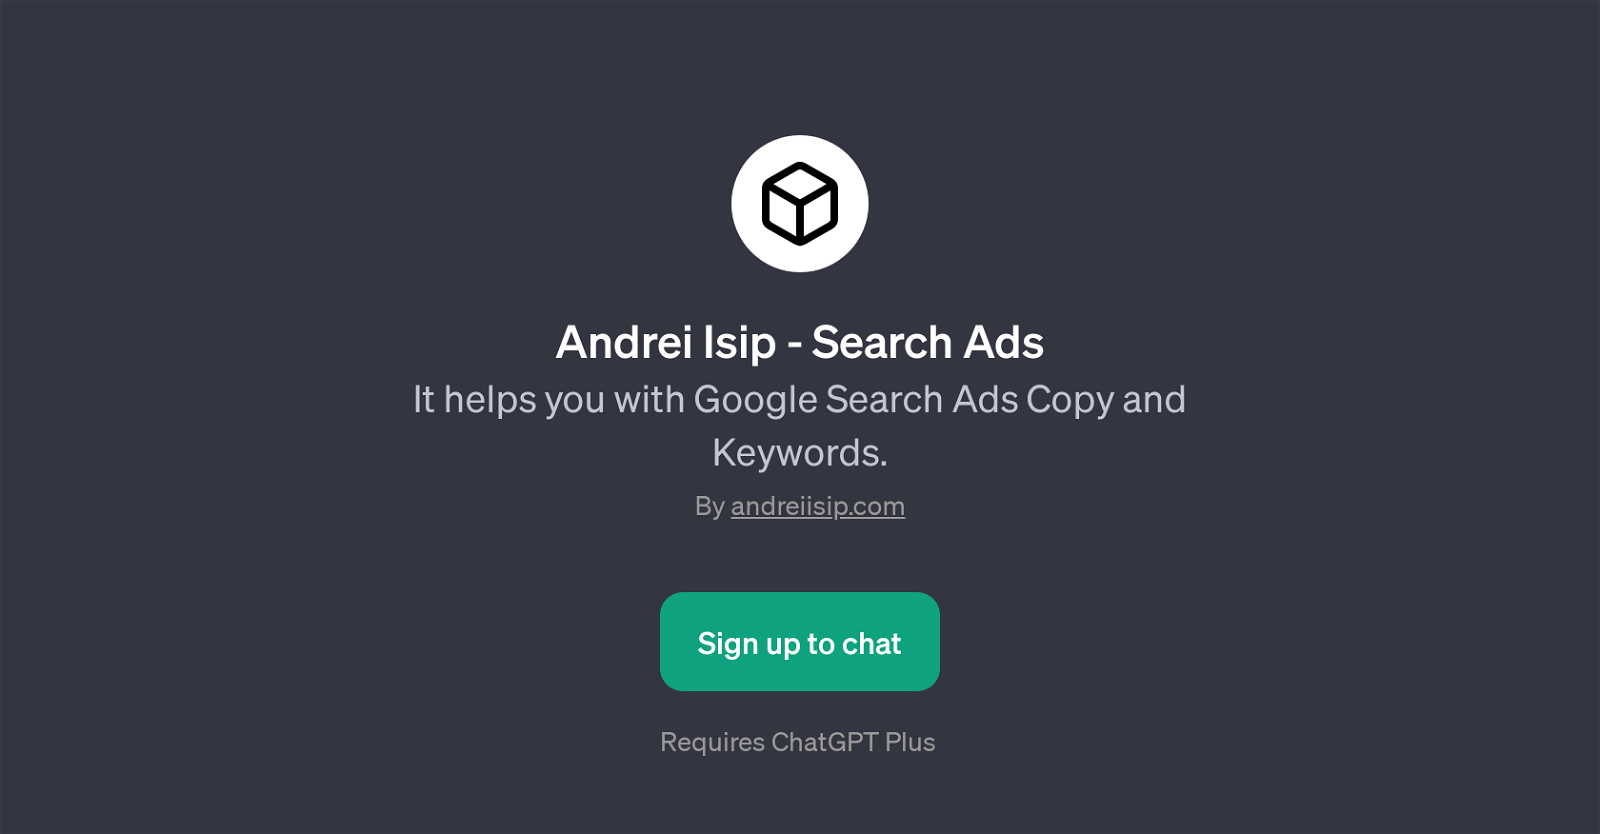 Andrei Isip - Search Ads website